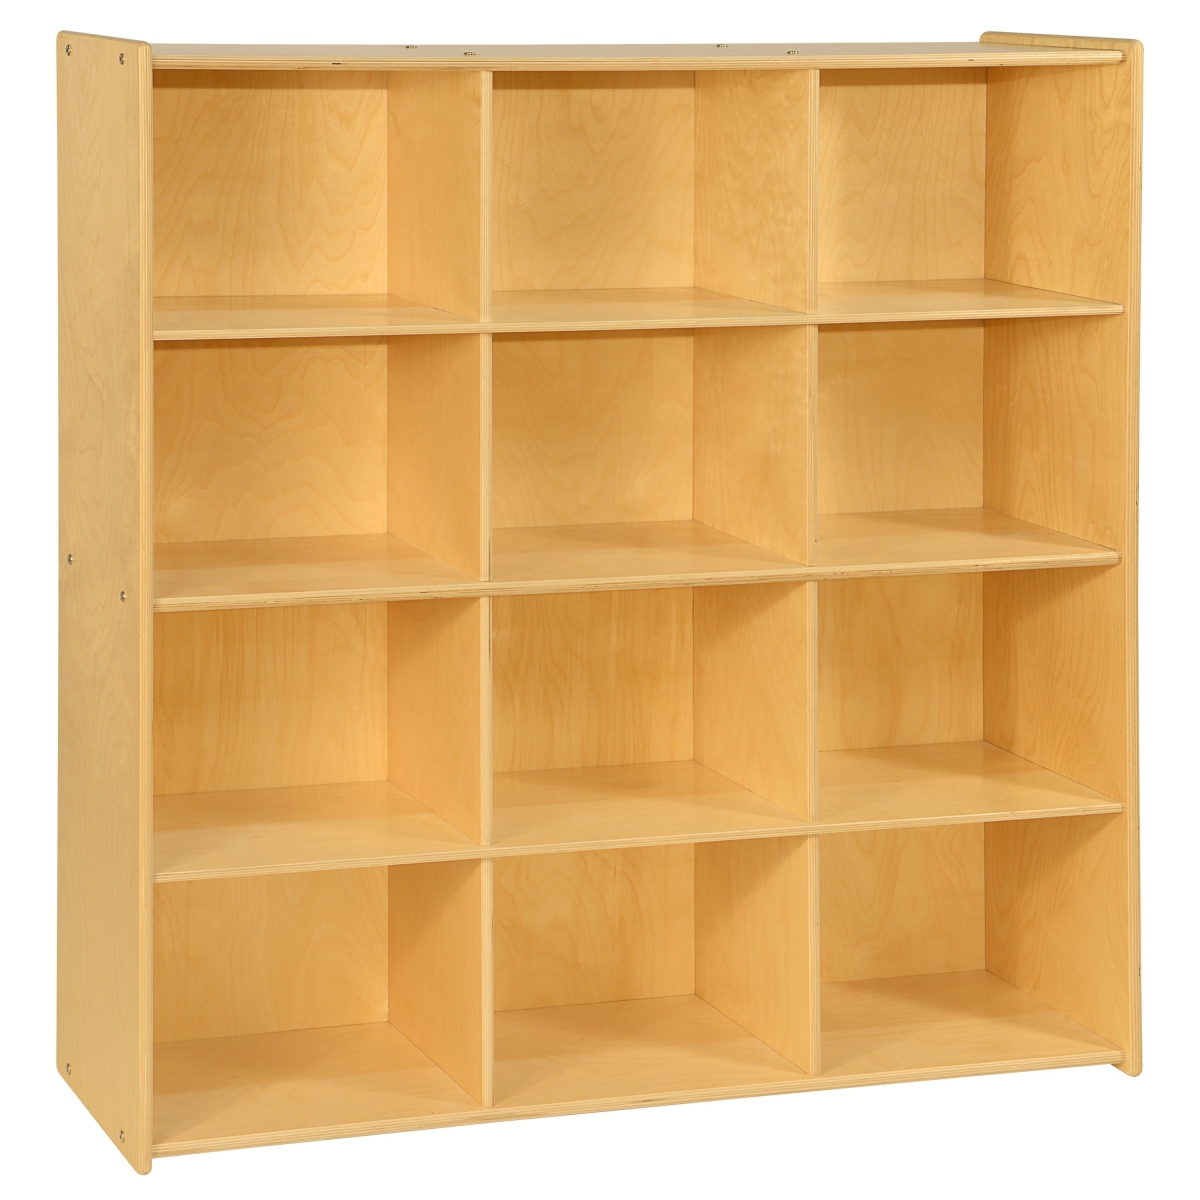 Picture of Contender C50912 Big Cubby Storage with 12 Cubbies - RTA